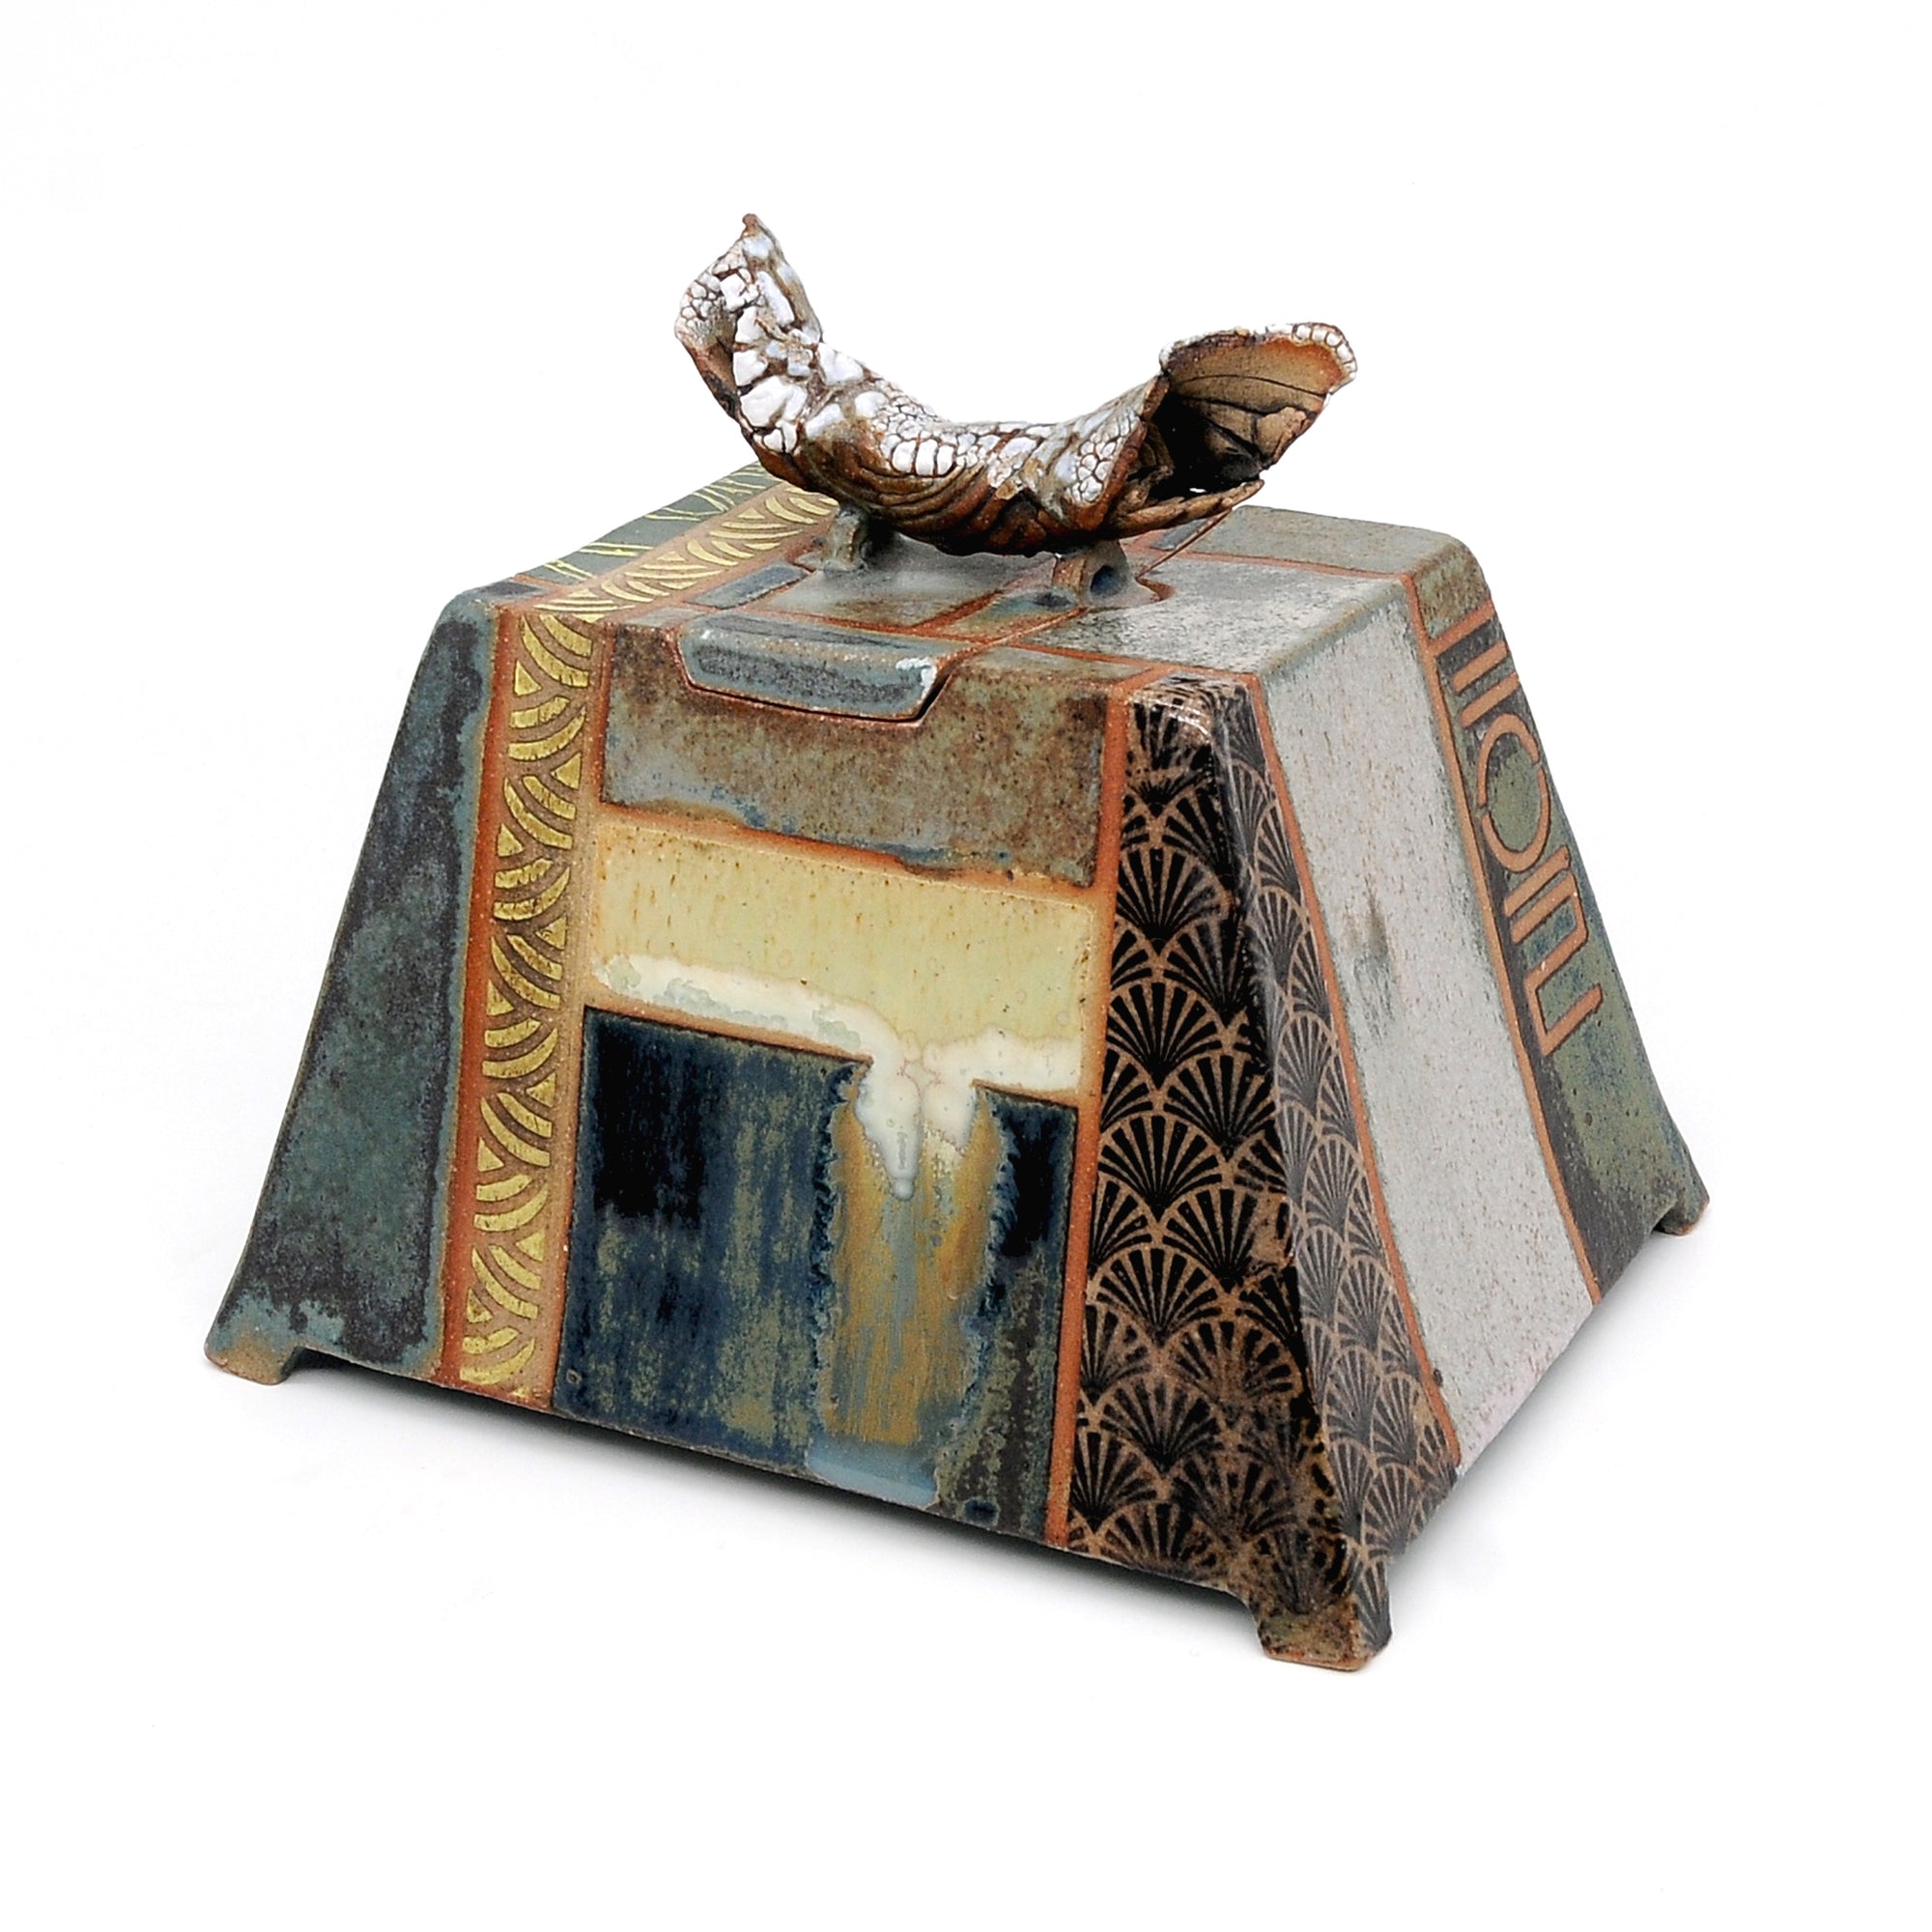 'MK14 Large Box’ by Miae Kim ceramics, available at Padstow Gallery, Cornwall